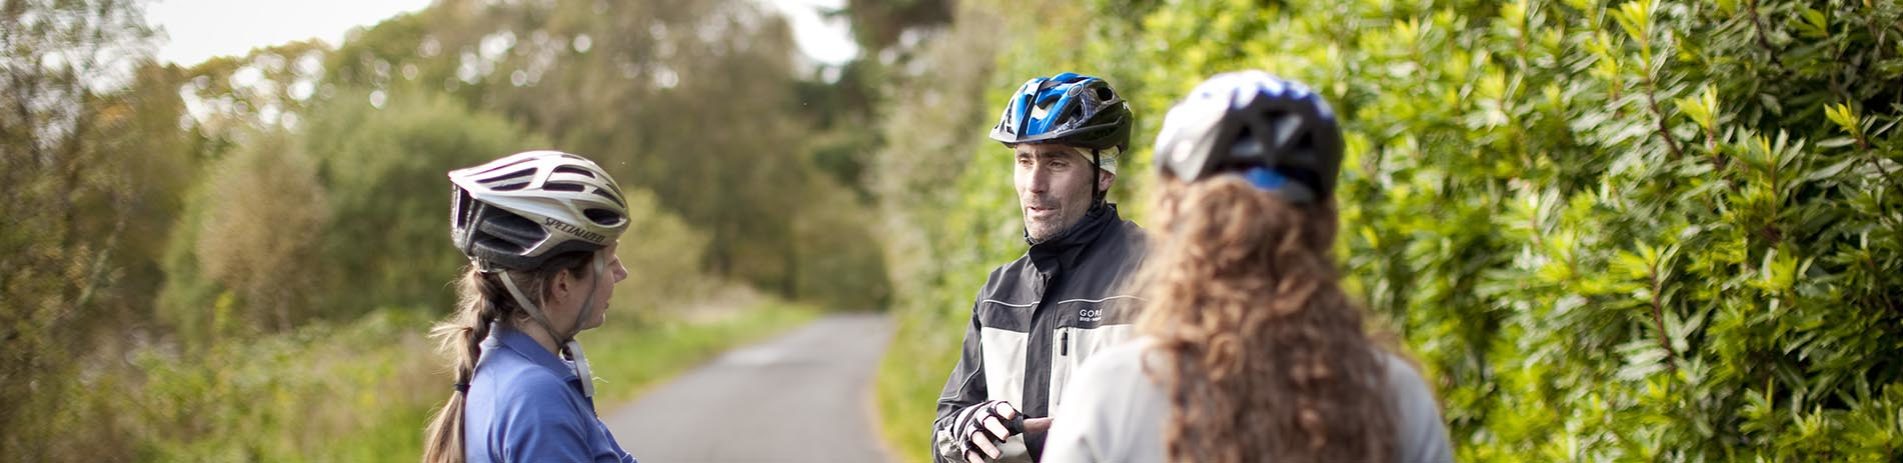 three-cyclists-wearing-bike-helmets-chatting-on-bike-path-with-trees-on-the-left-and-rhododendron-bushes-on-the-right